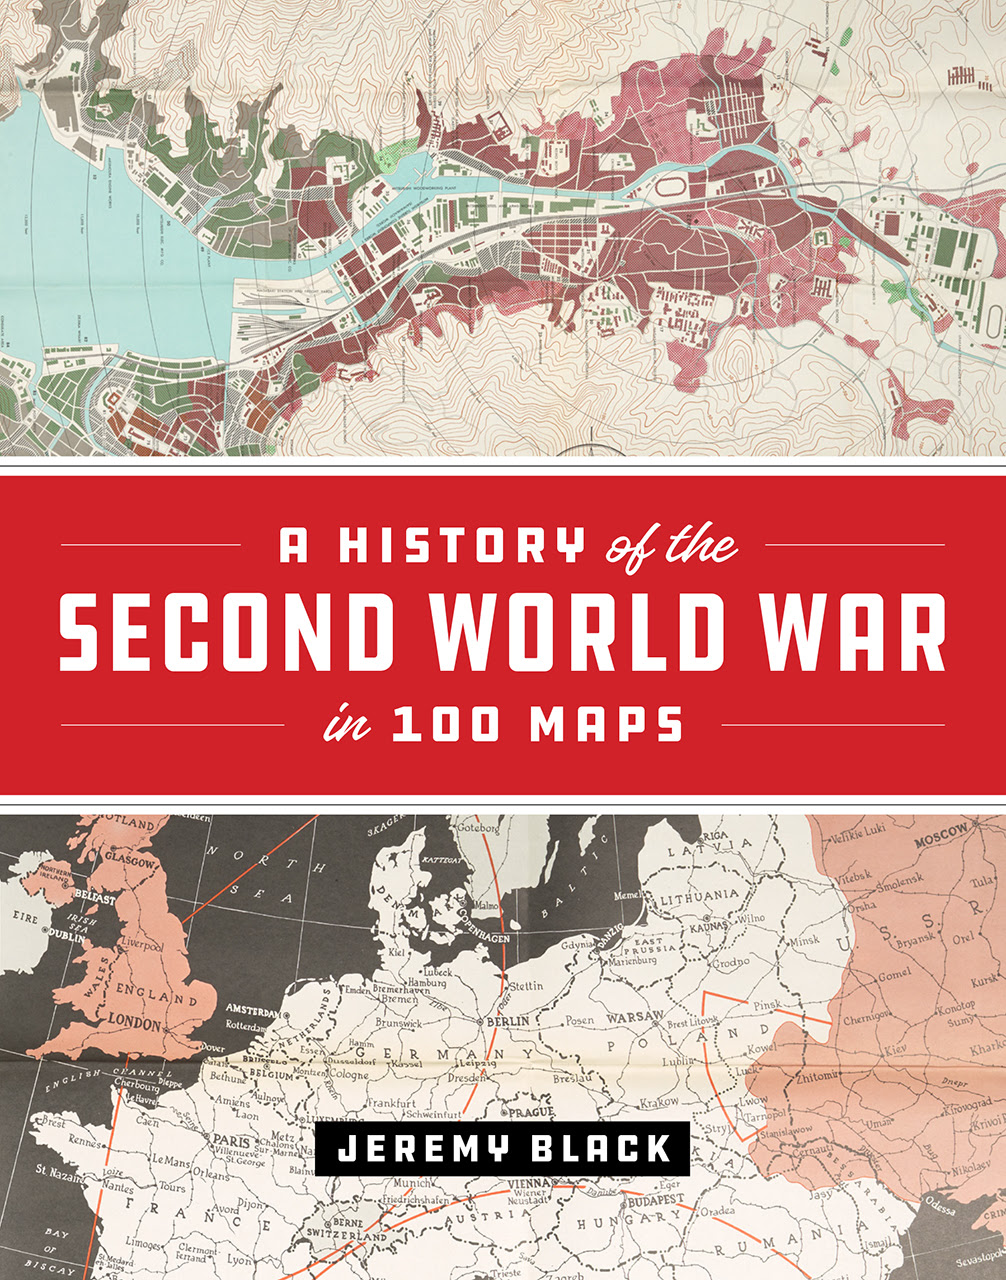 A History of the Second World War in 100 Maps in Kindle/PDF/EPUB